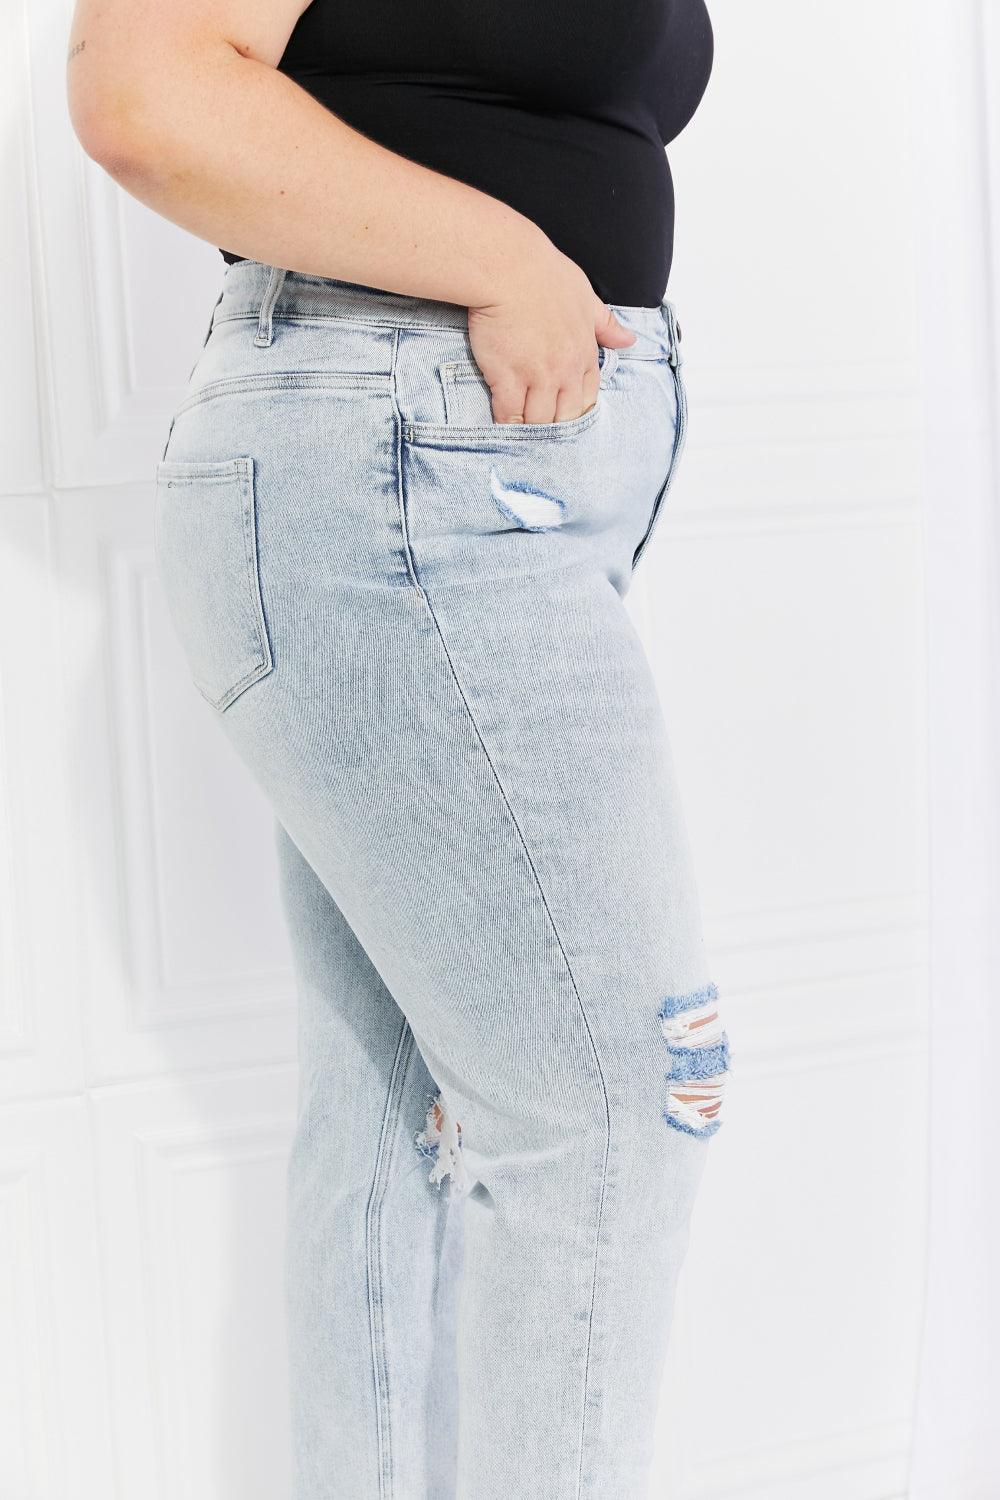 VERVET Stand Out Full Size Distressed Cropped Jeans - The Fiery Jasmine